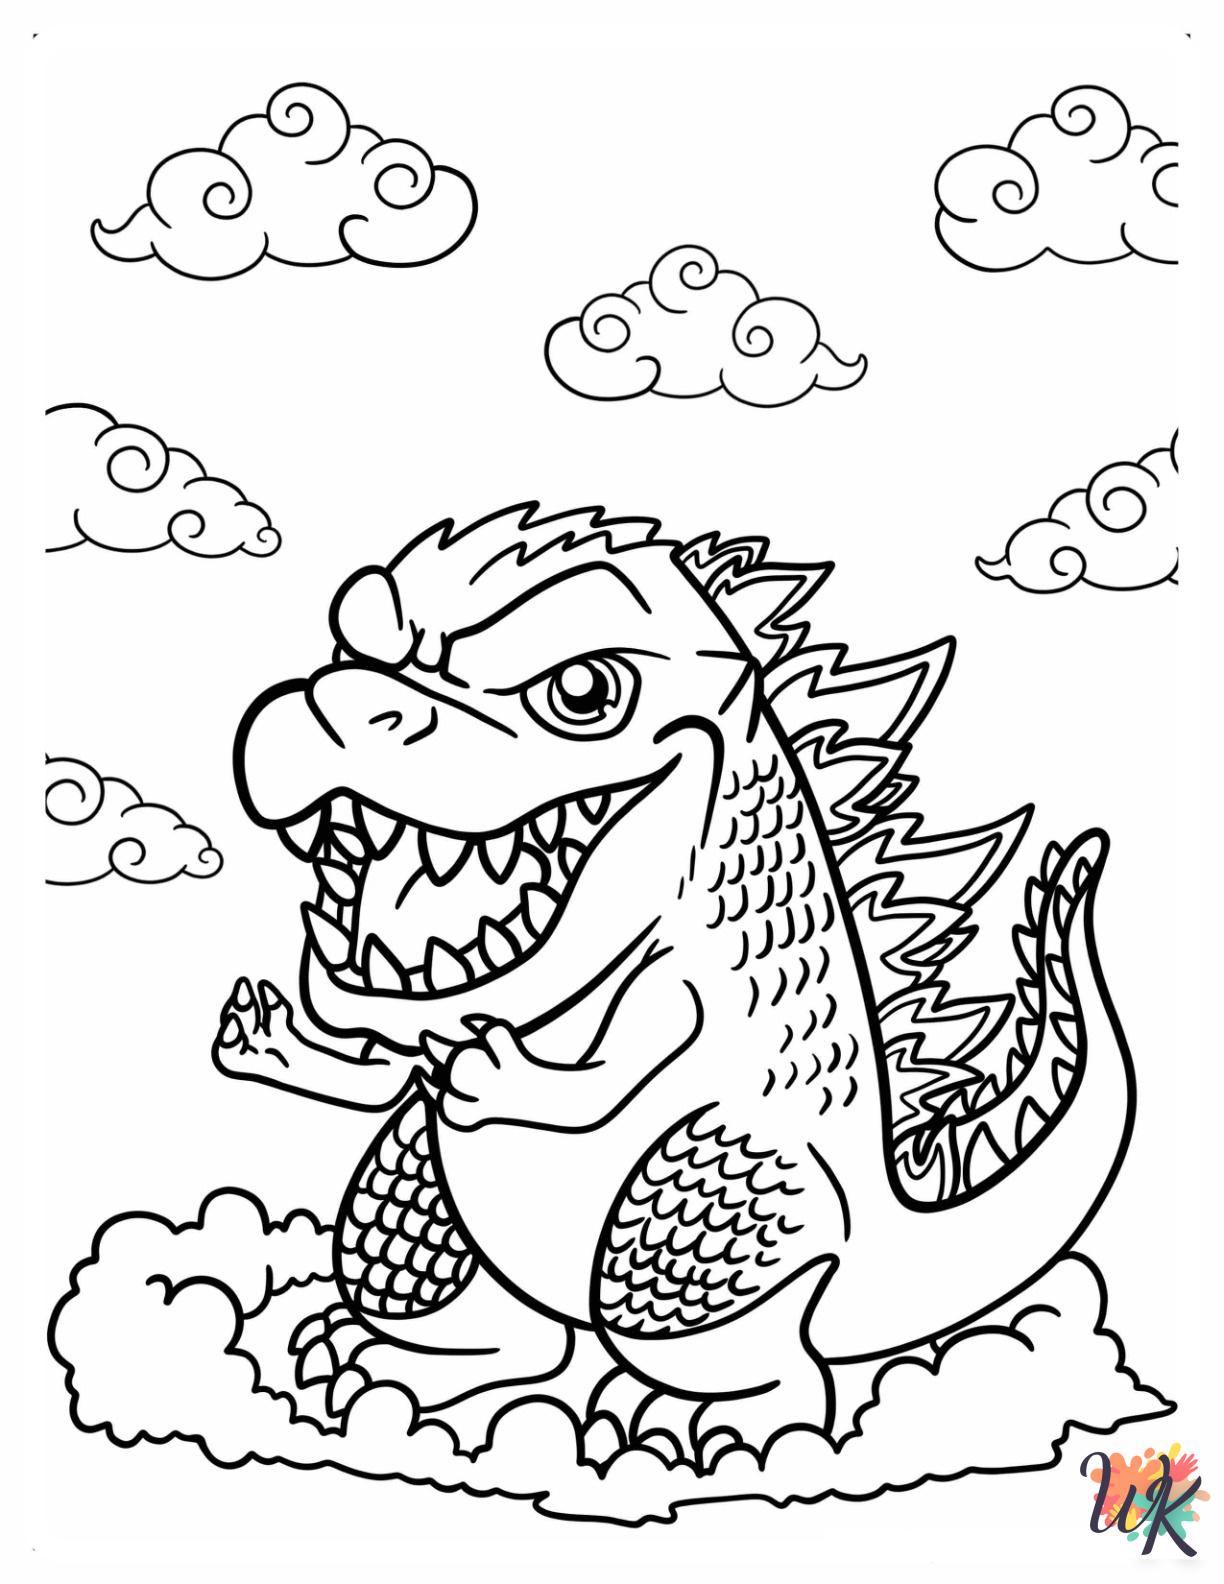 Godzilla coloring pages to print